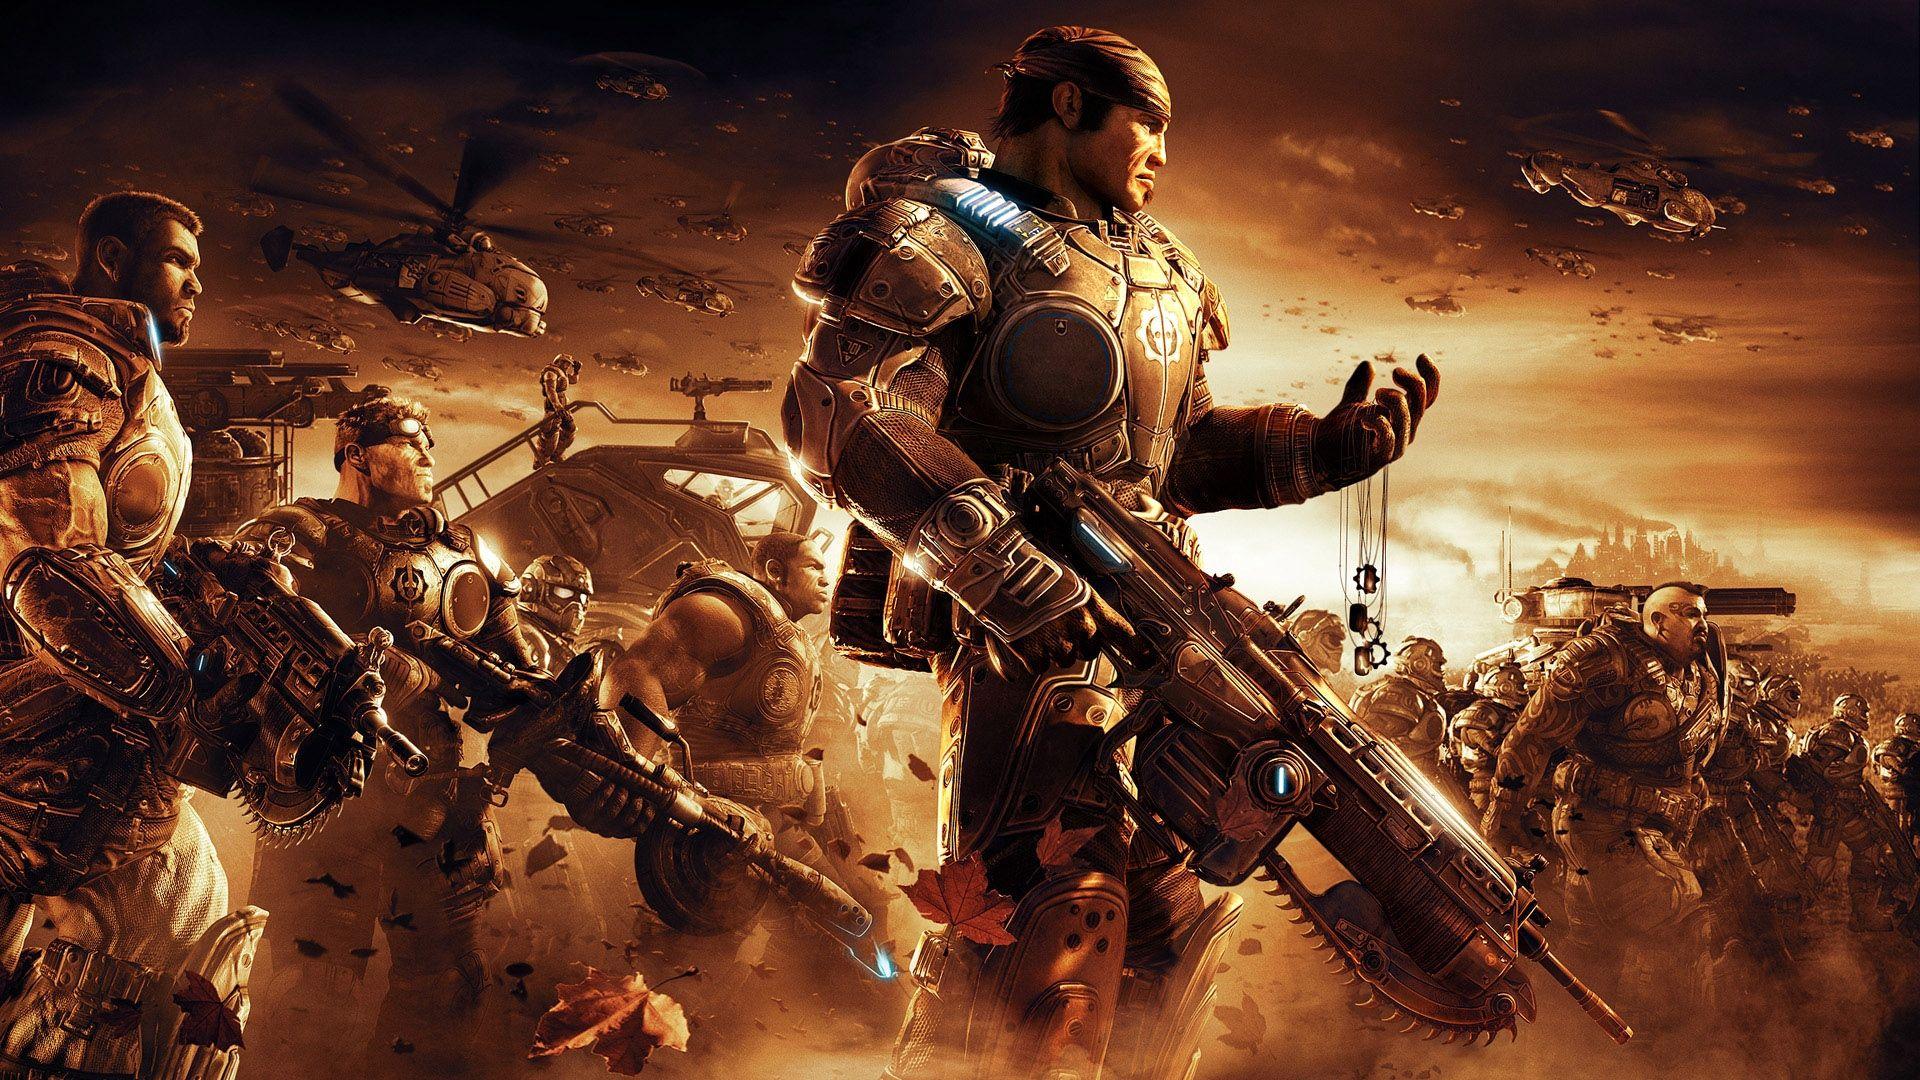 Download wallpaper 1920x1080 gears of war, soldiers, sky, helicopter